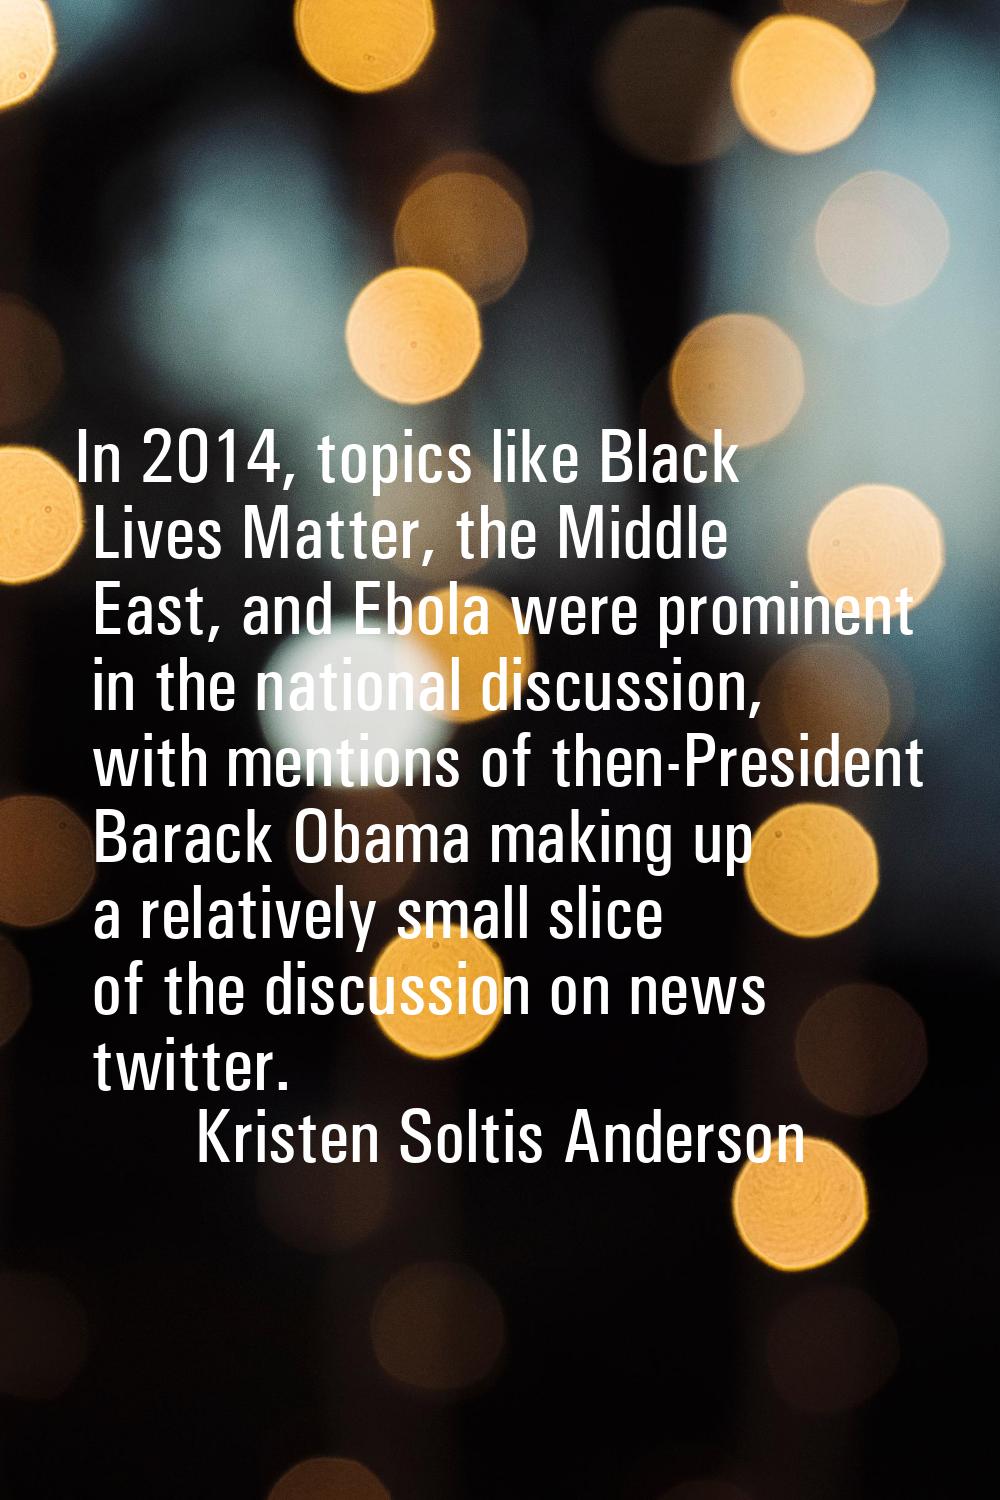 In 2014, topics like Black Lives Matter, the Middle East, and Ebola were prominent in the national 